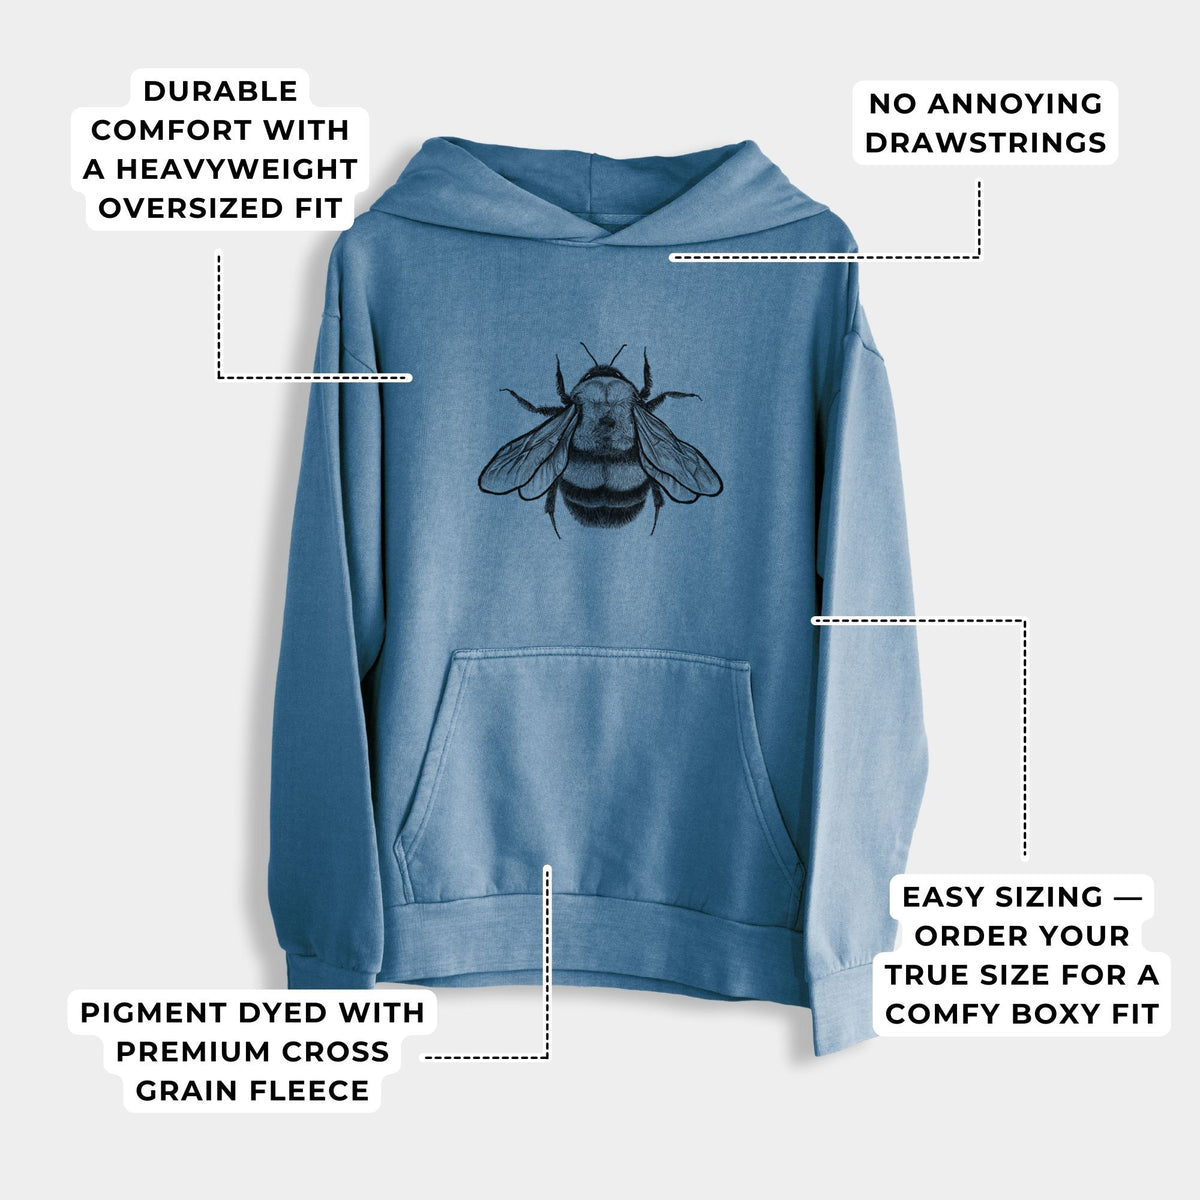 Bombus Affinis - Rusty-Patched Bumble Bee  - Urban Heavyweight Hoodie